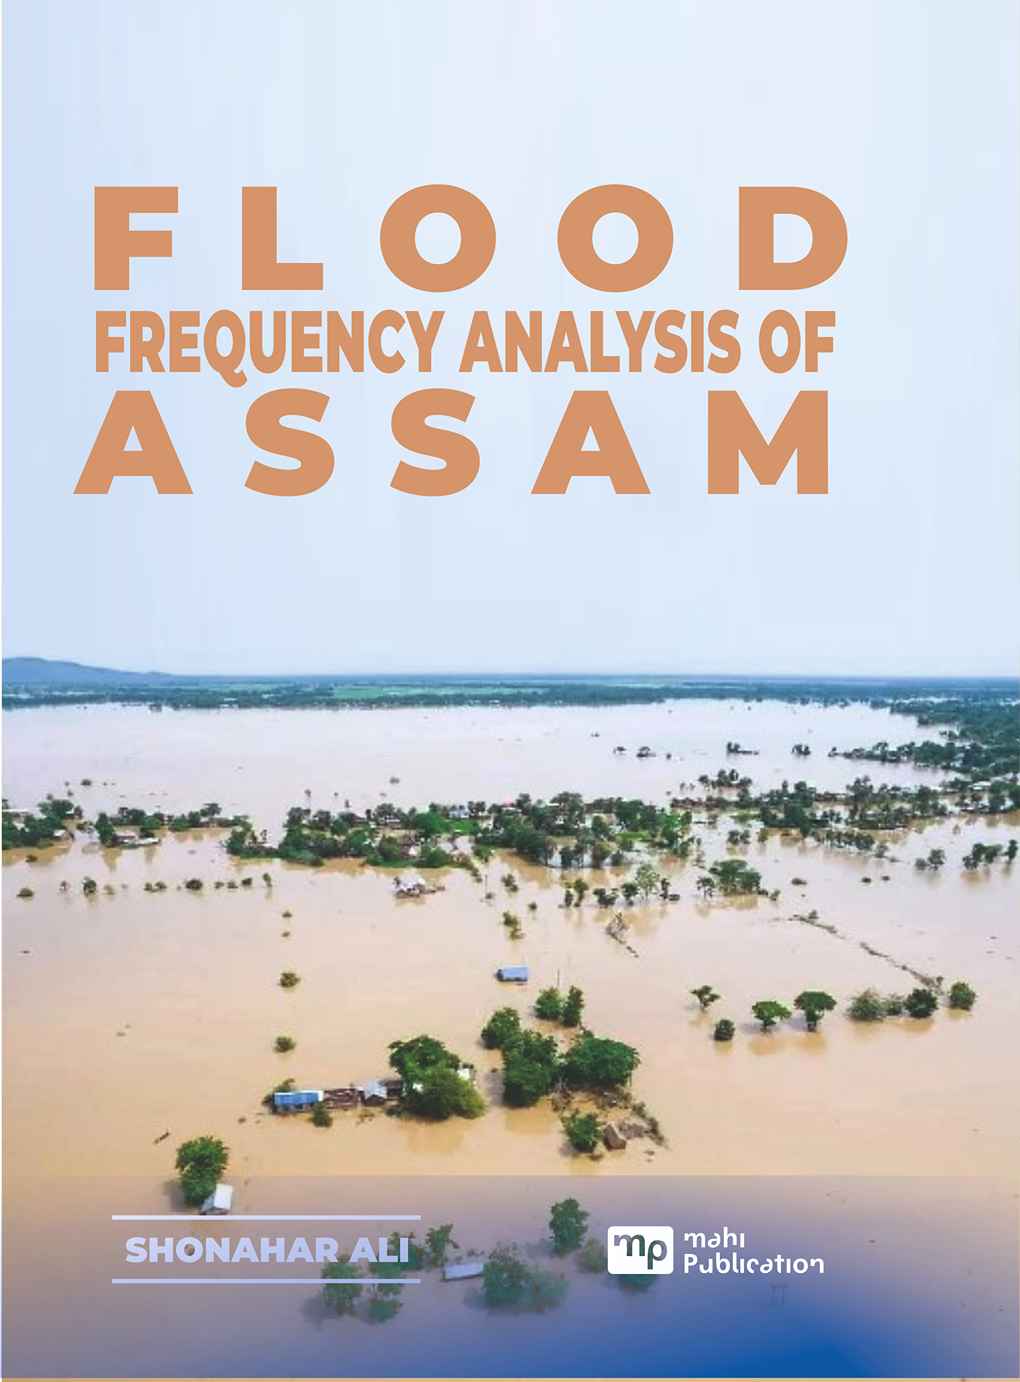 Flood frequency analysis of assam